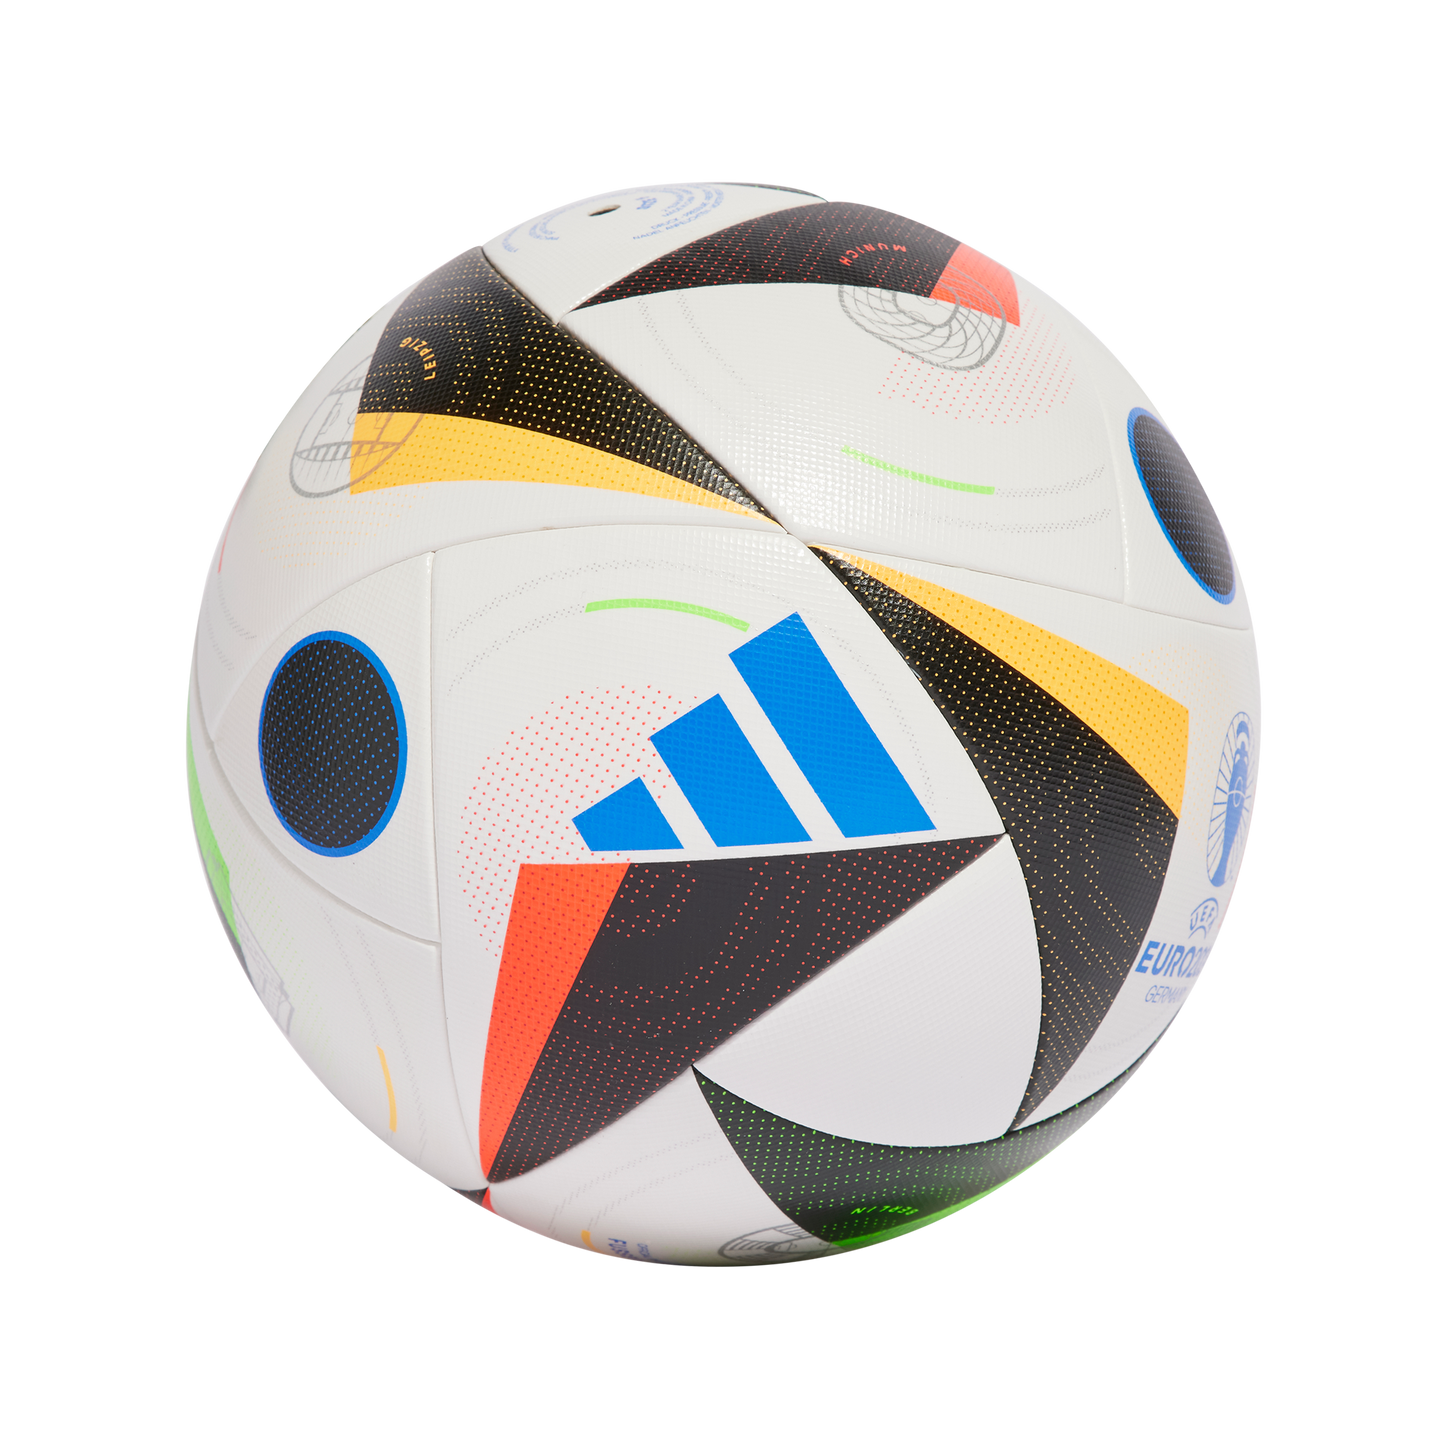 adidas Euro 2024 Competition Soccer Ball